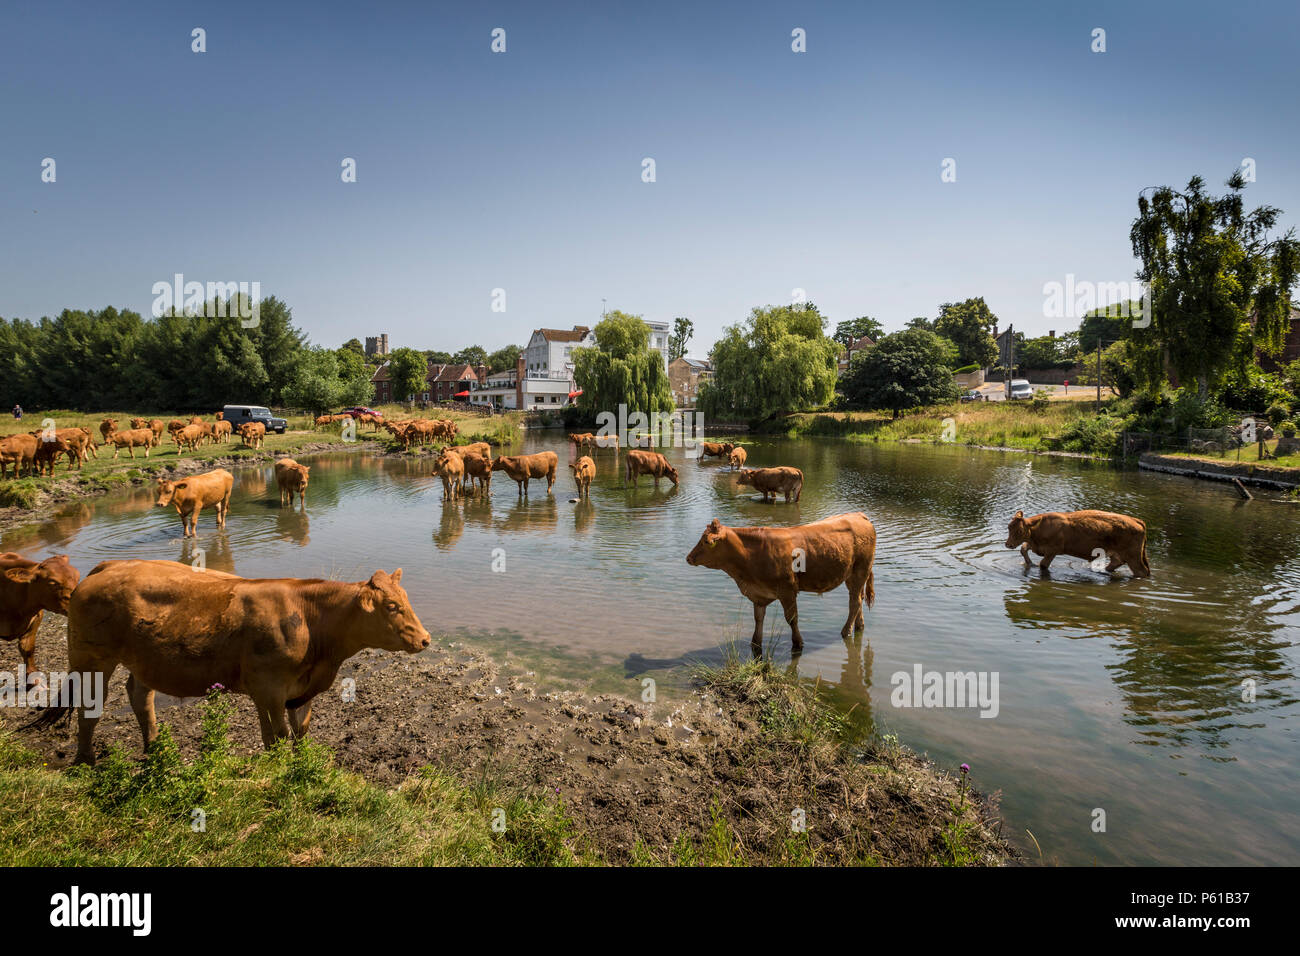 Sudbury, Suffolk, UK. 28th June 2018. UK weather - cattle keeping cool in The River Stour, Suffolk. Stock Photo